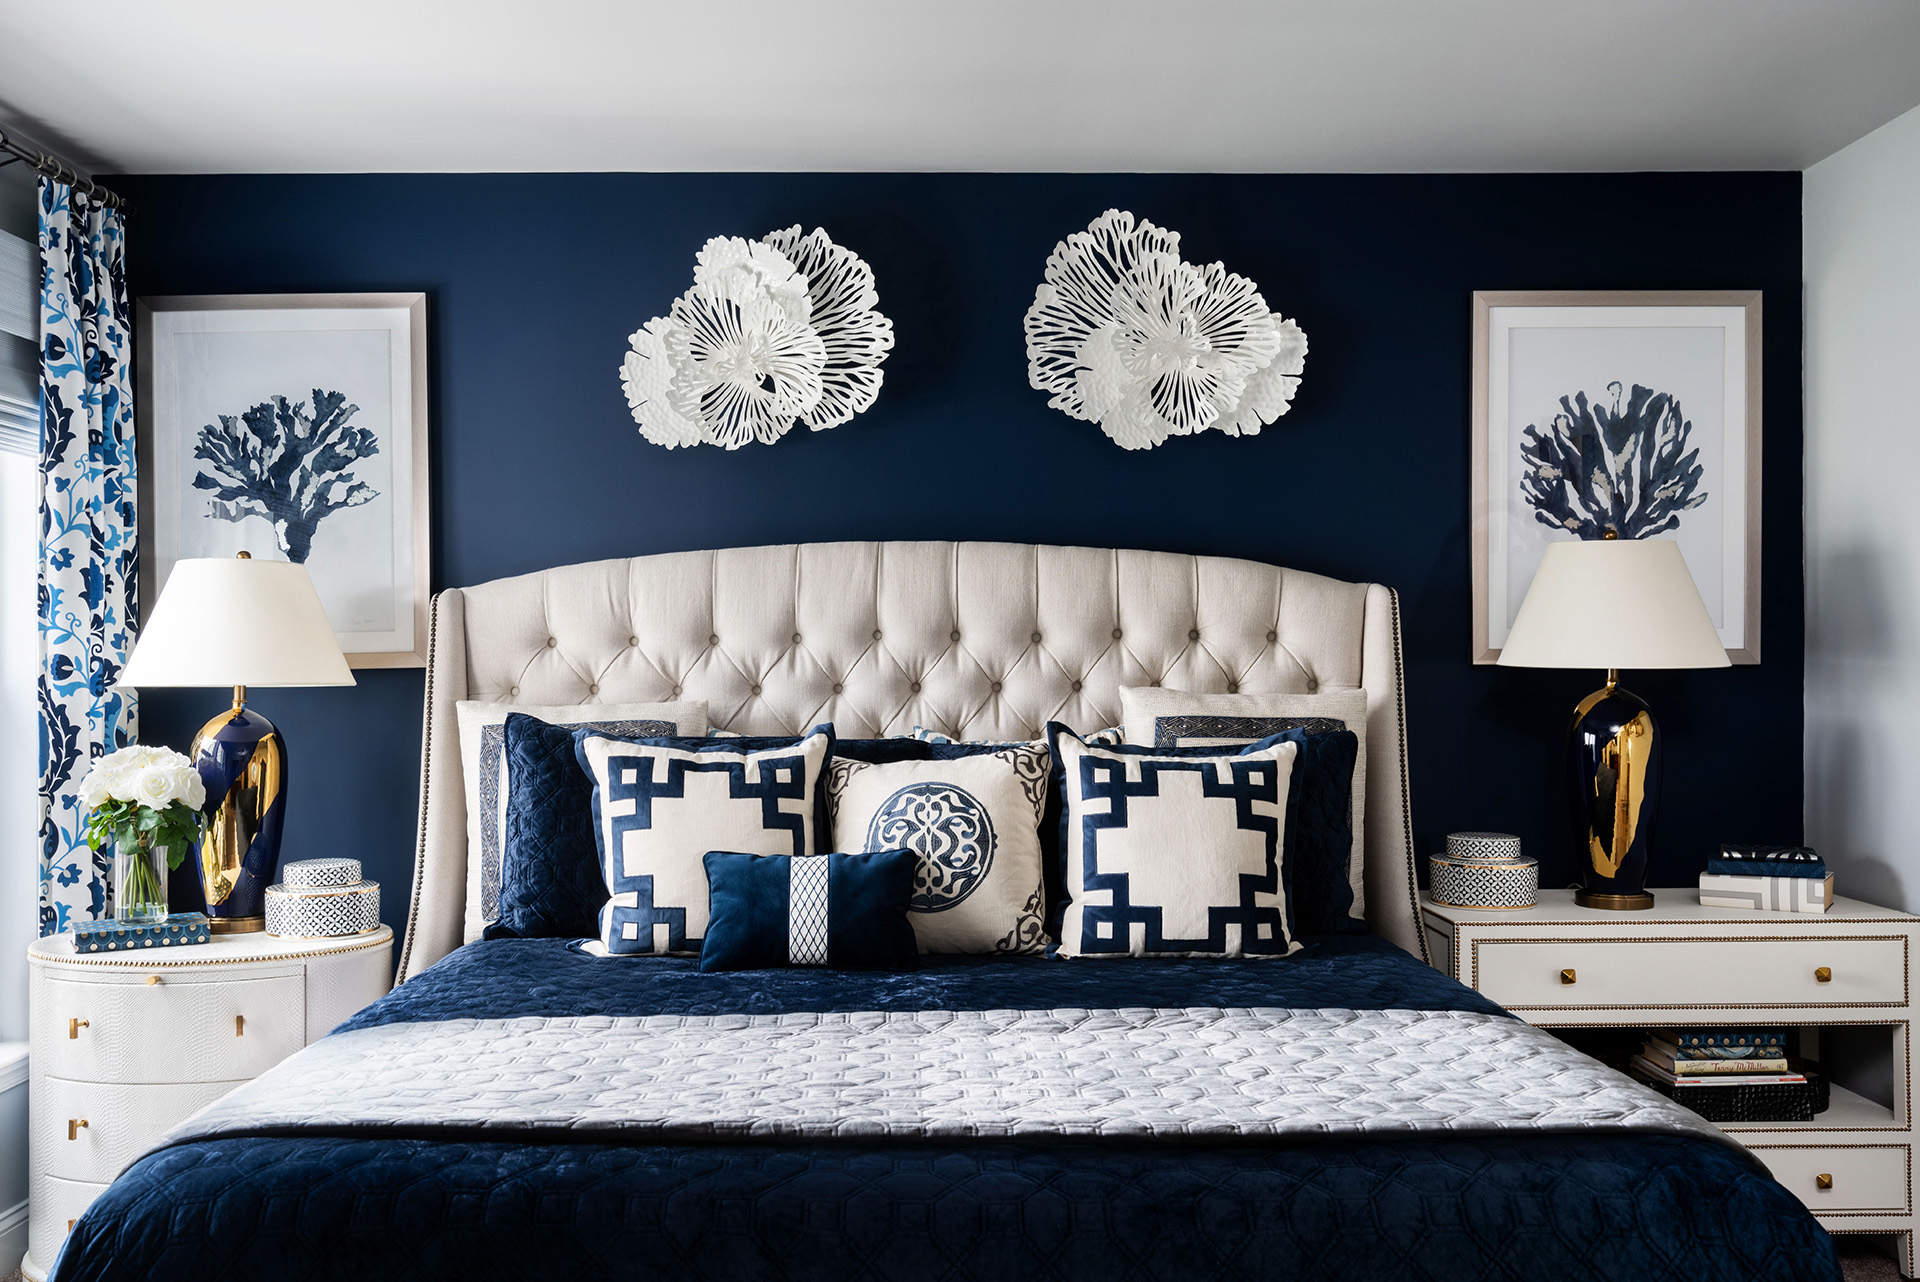 Blue & White Patterned Pillows